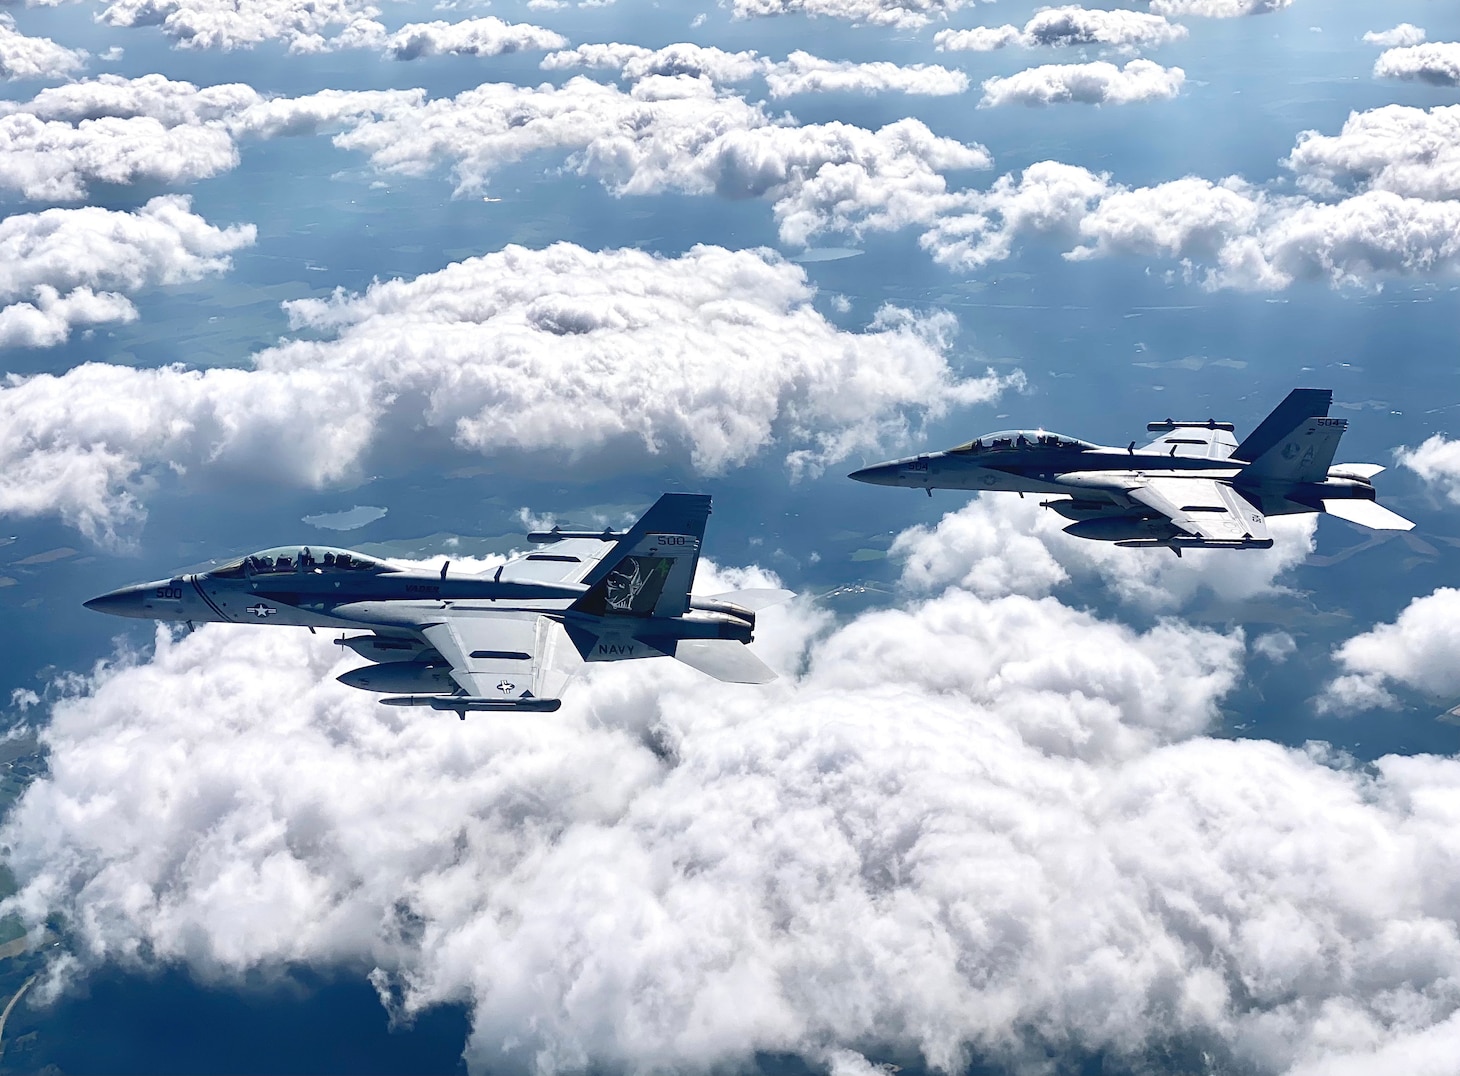 CAMP DOUGLAS, Wisc. (Aug. 17, 2021) EA-18G Growlers assigned to the "Star Warriors" of Electronic Attack Squadron (VAQ) 209 fly over Camp Douglas, Wisc. during Northern Lightning 2021. Northern Lightning is a full-spectrum Counterland training exercise hosted at Volk Field Air National Guard Base. The goal of the exercise is to provide a tailored, cost effective and realistic combat training for the Department of Defense Total Force. (U.S. Navy photo by Cmdr. Pete Scheu)